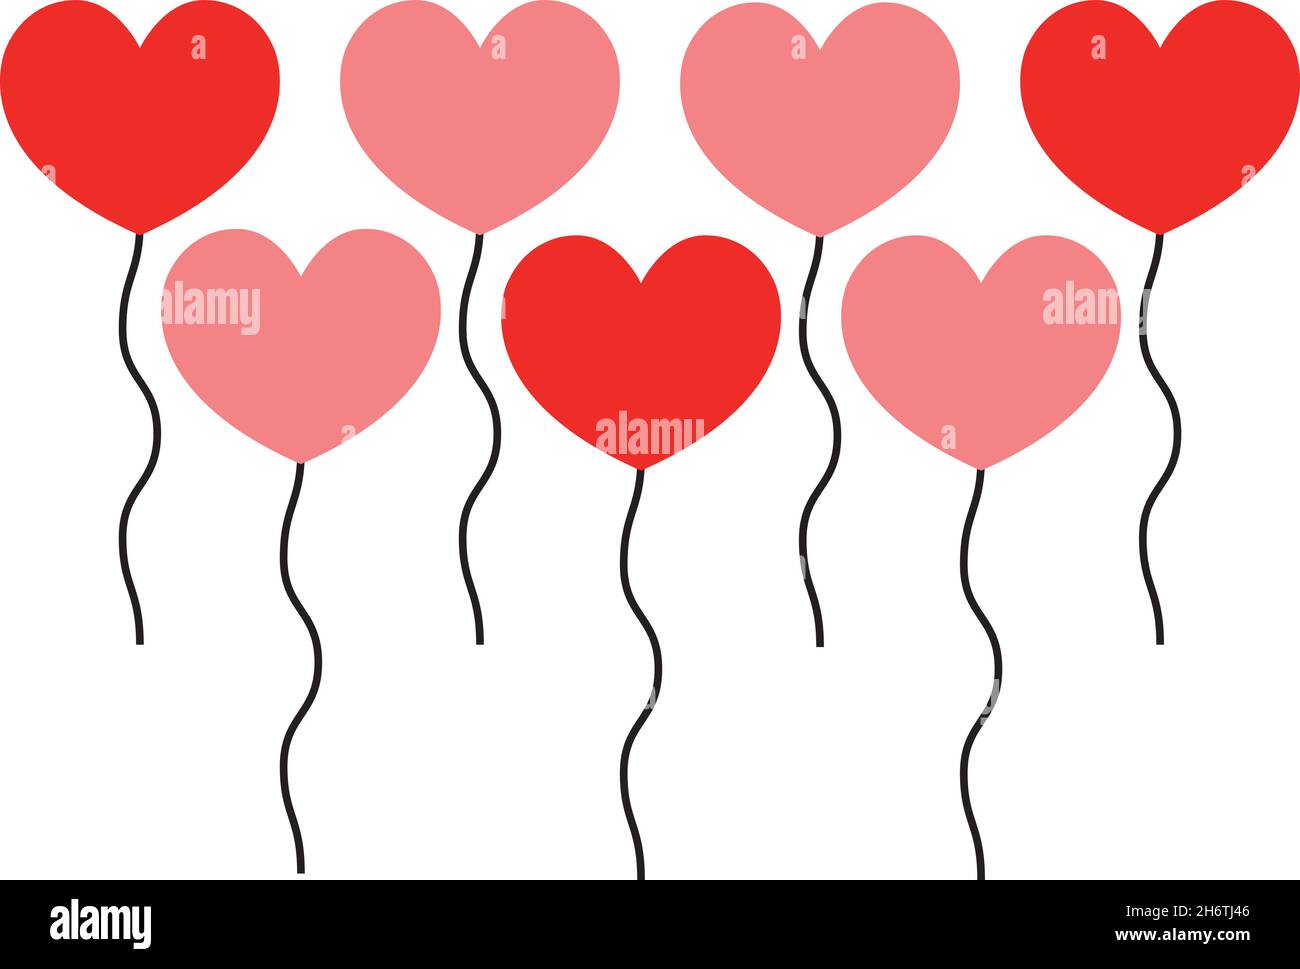 There are several heart balloons. You can express love or use it as a decoration on anniversaries. Stock Vector